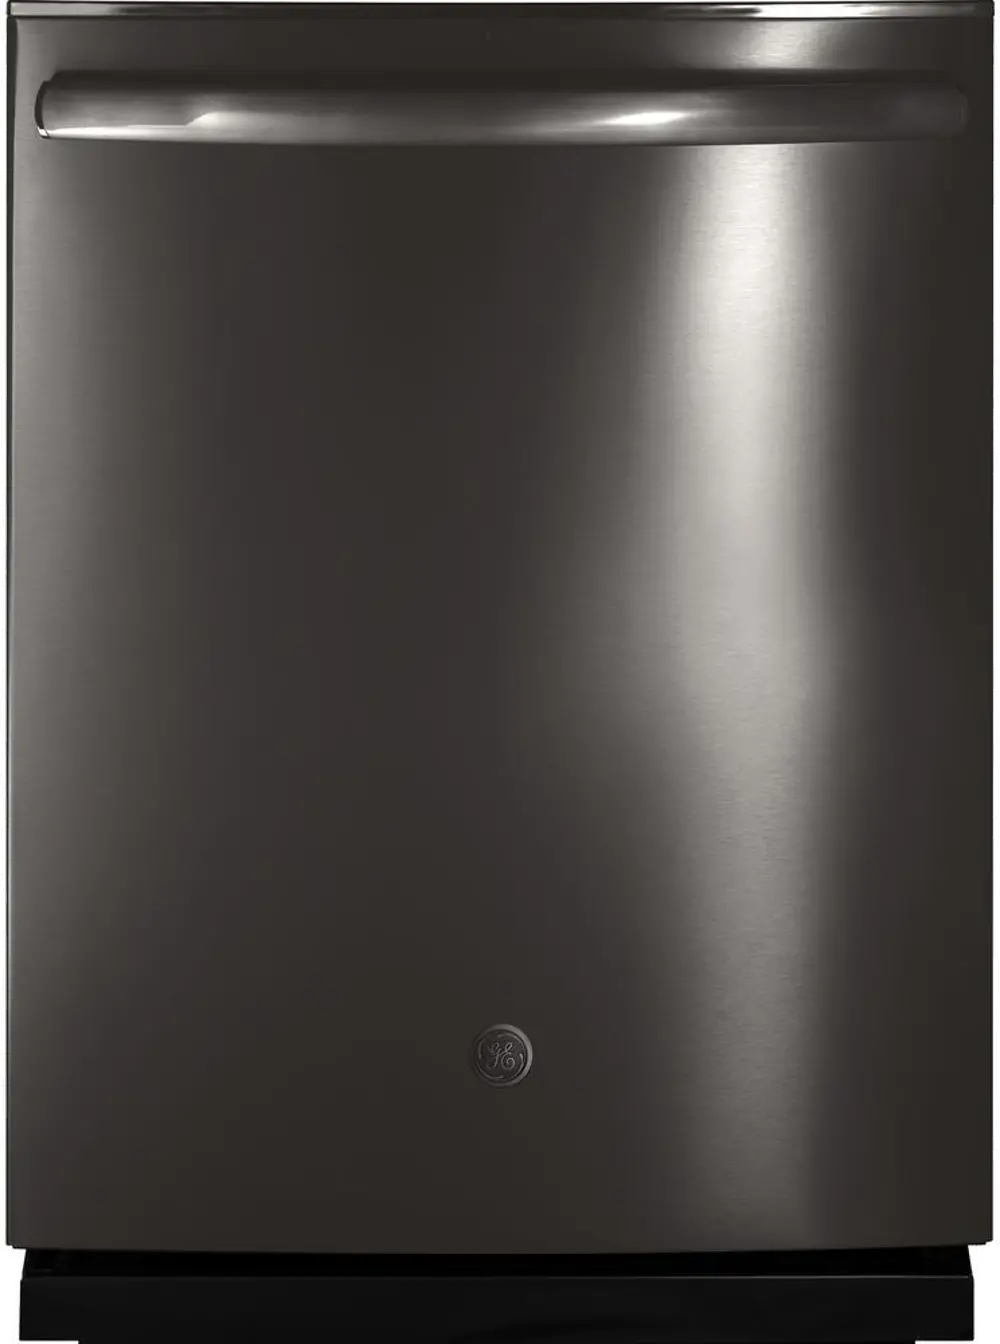 GDT695SBLTS GE Dishwasher - Black Stainless Steel with a Stainless Steel Interior-1